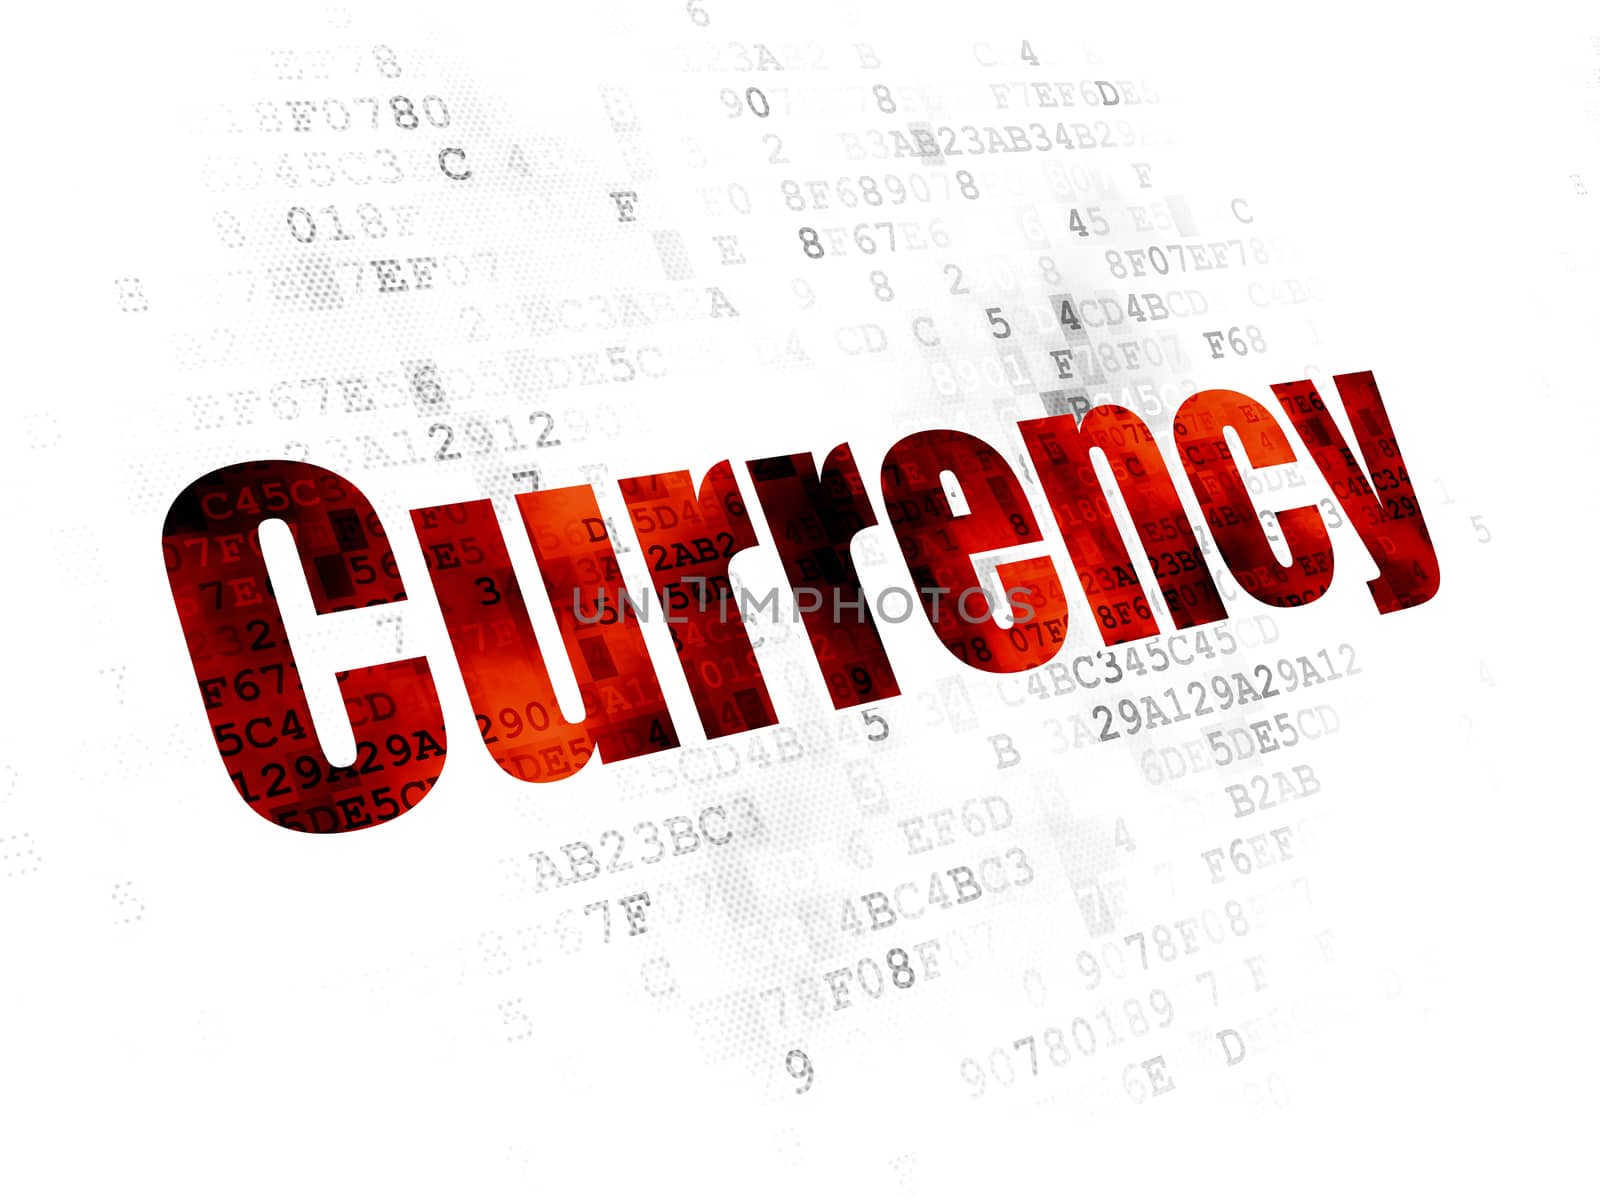 Banking concept: Pixelated red text Currency on Digital background